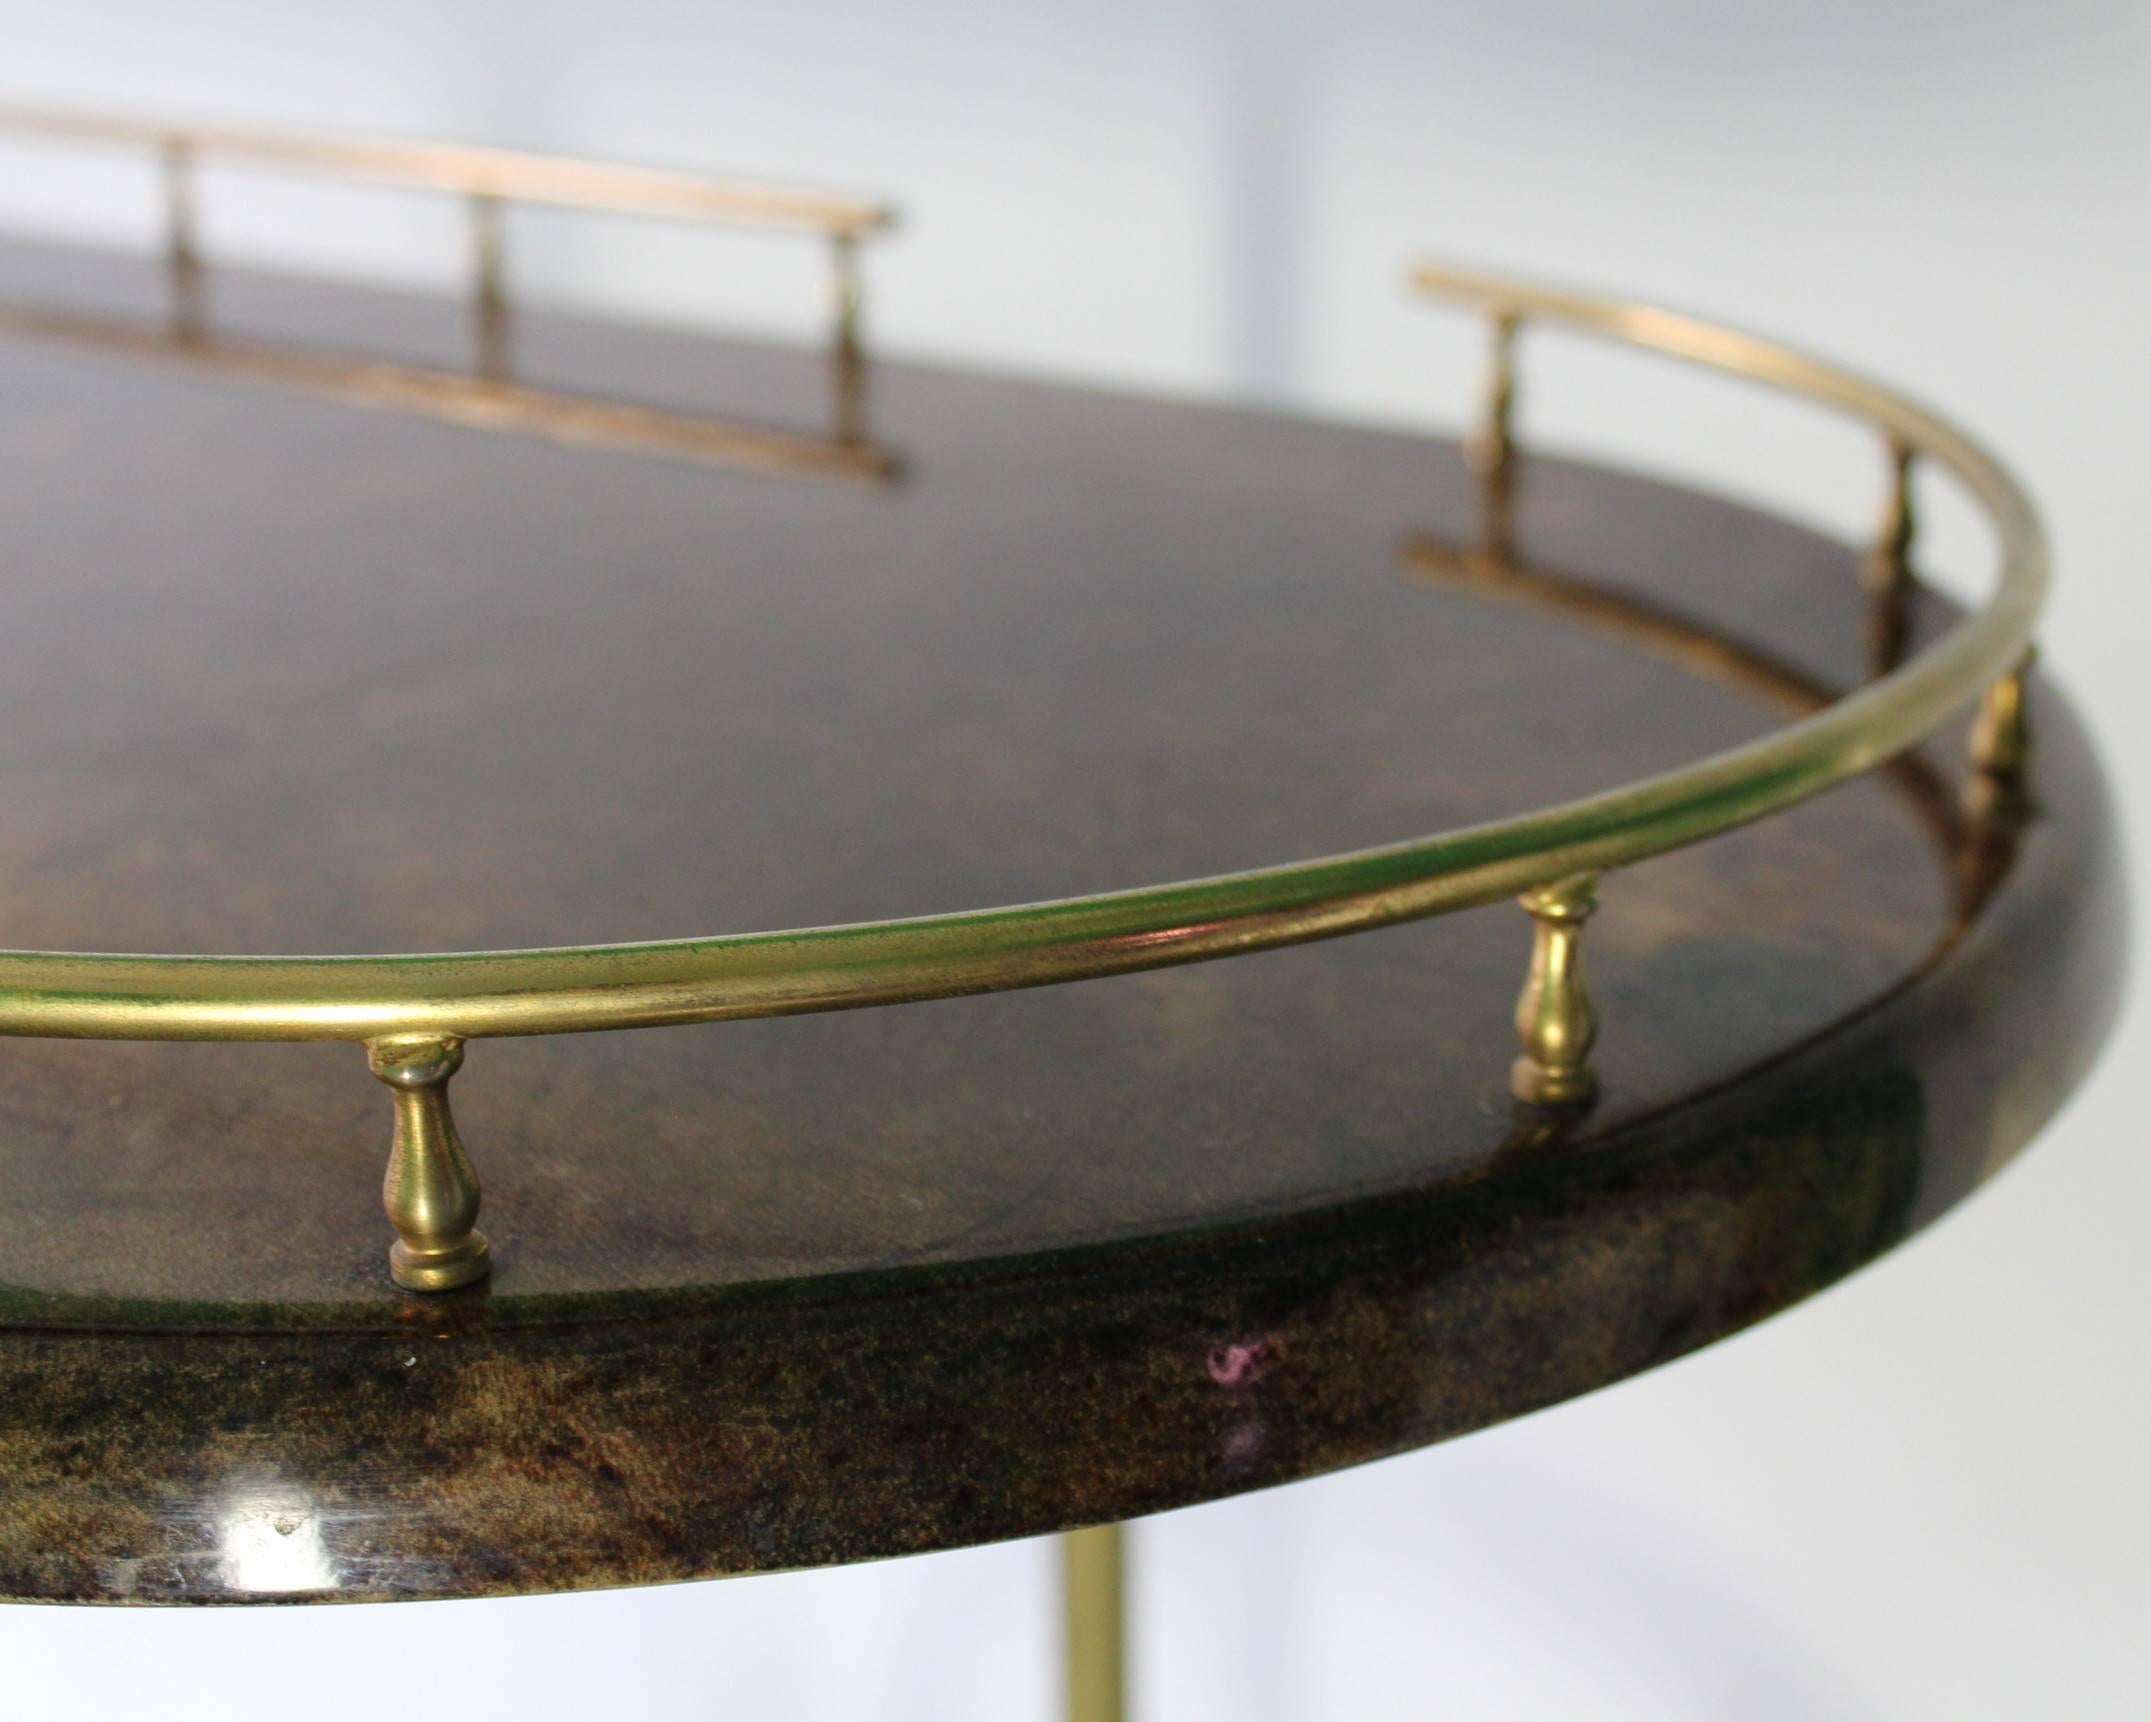 An Italian service and bar cart by Aldo Tura, produced circa 1950s, with two rounded tiers in brown lacquered goatskin, each with brass galleries, the top with scrolled push handle, the bottom with three bottle holders on spoke wheels, separated by